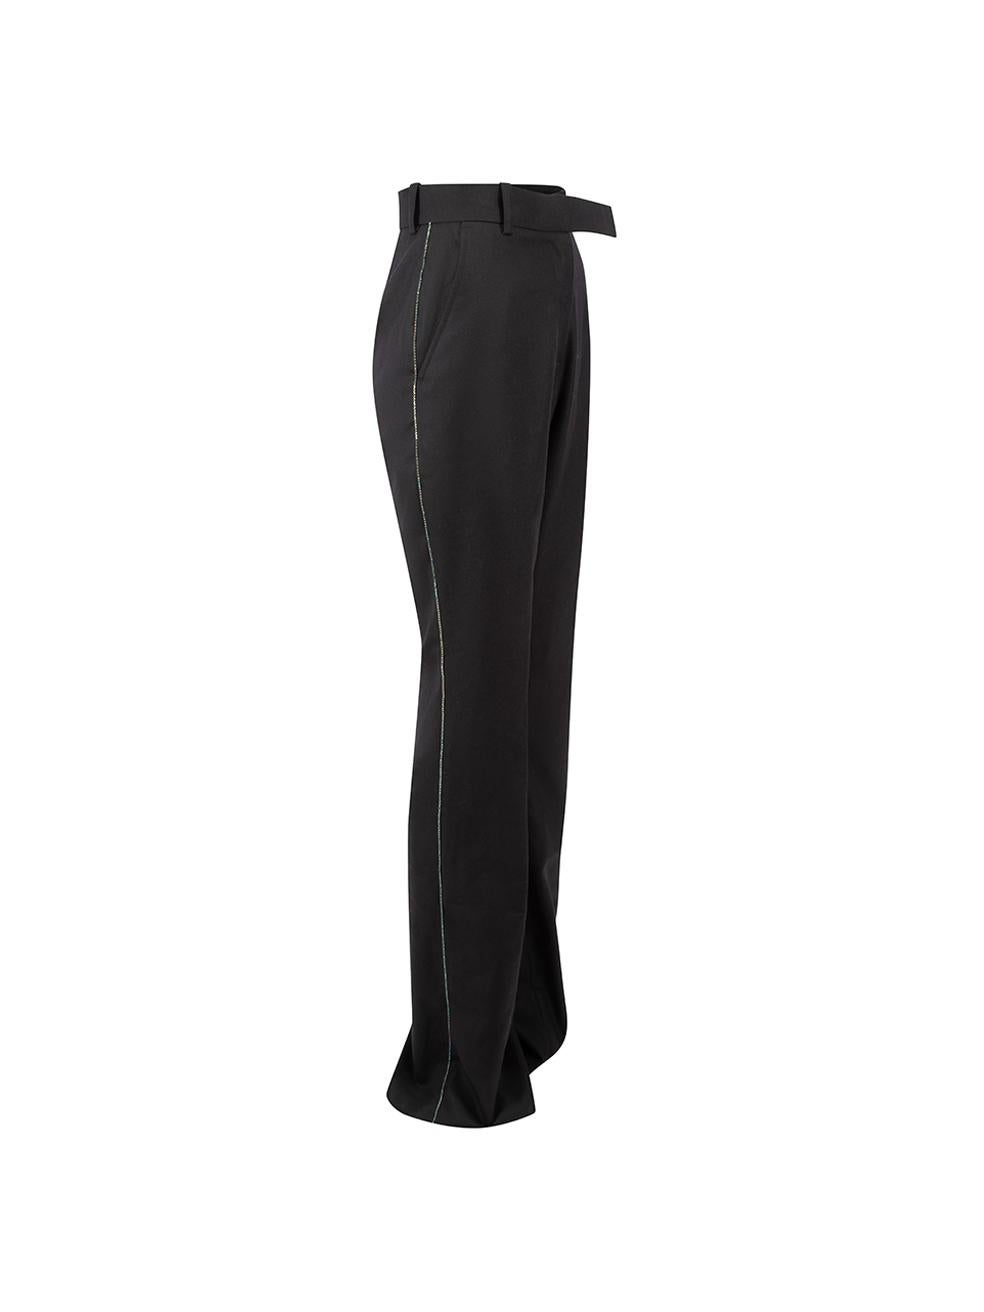 CONDITION is Very good. Hardly any visible wear to trousers is evident on this used Sanne designer sample item. 
 
 Details
  Designer sample item
 Black
 Wool
 Flared long trousers
 Beaded accent on sides
 High rise
 Front zip closure with clasps
